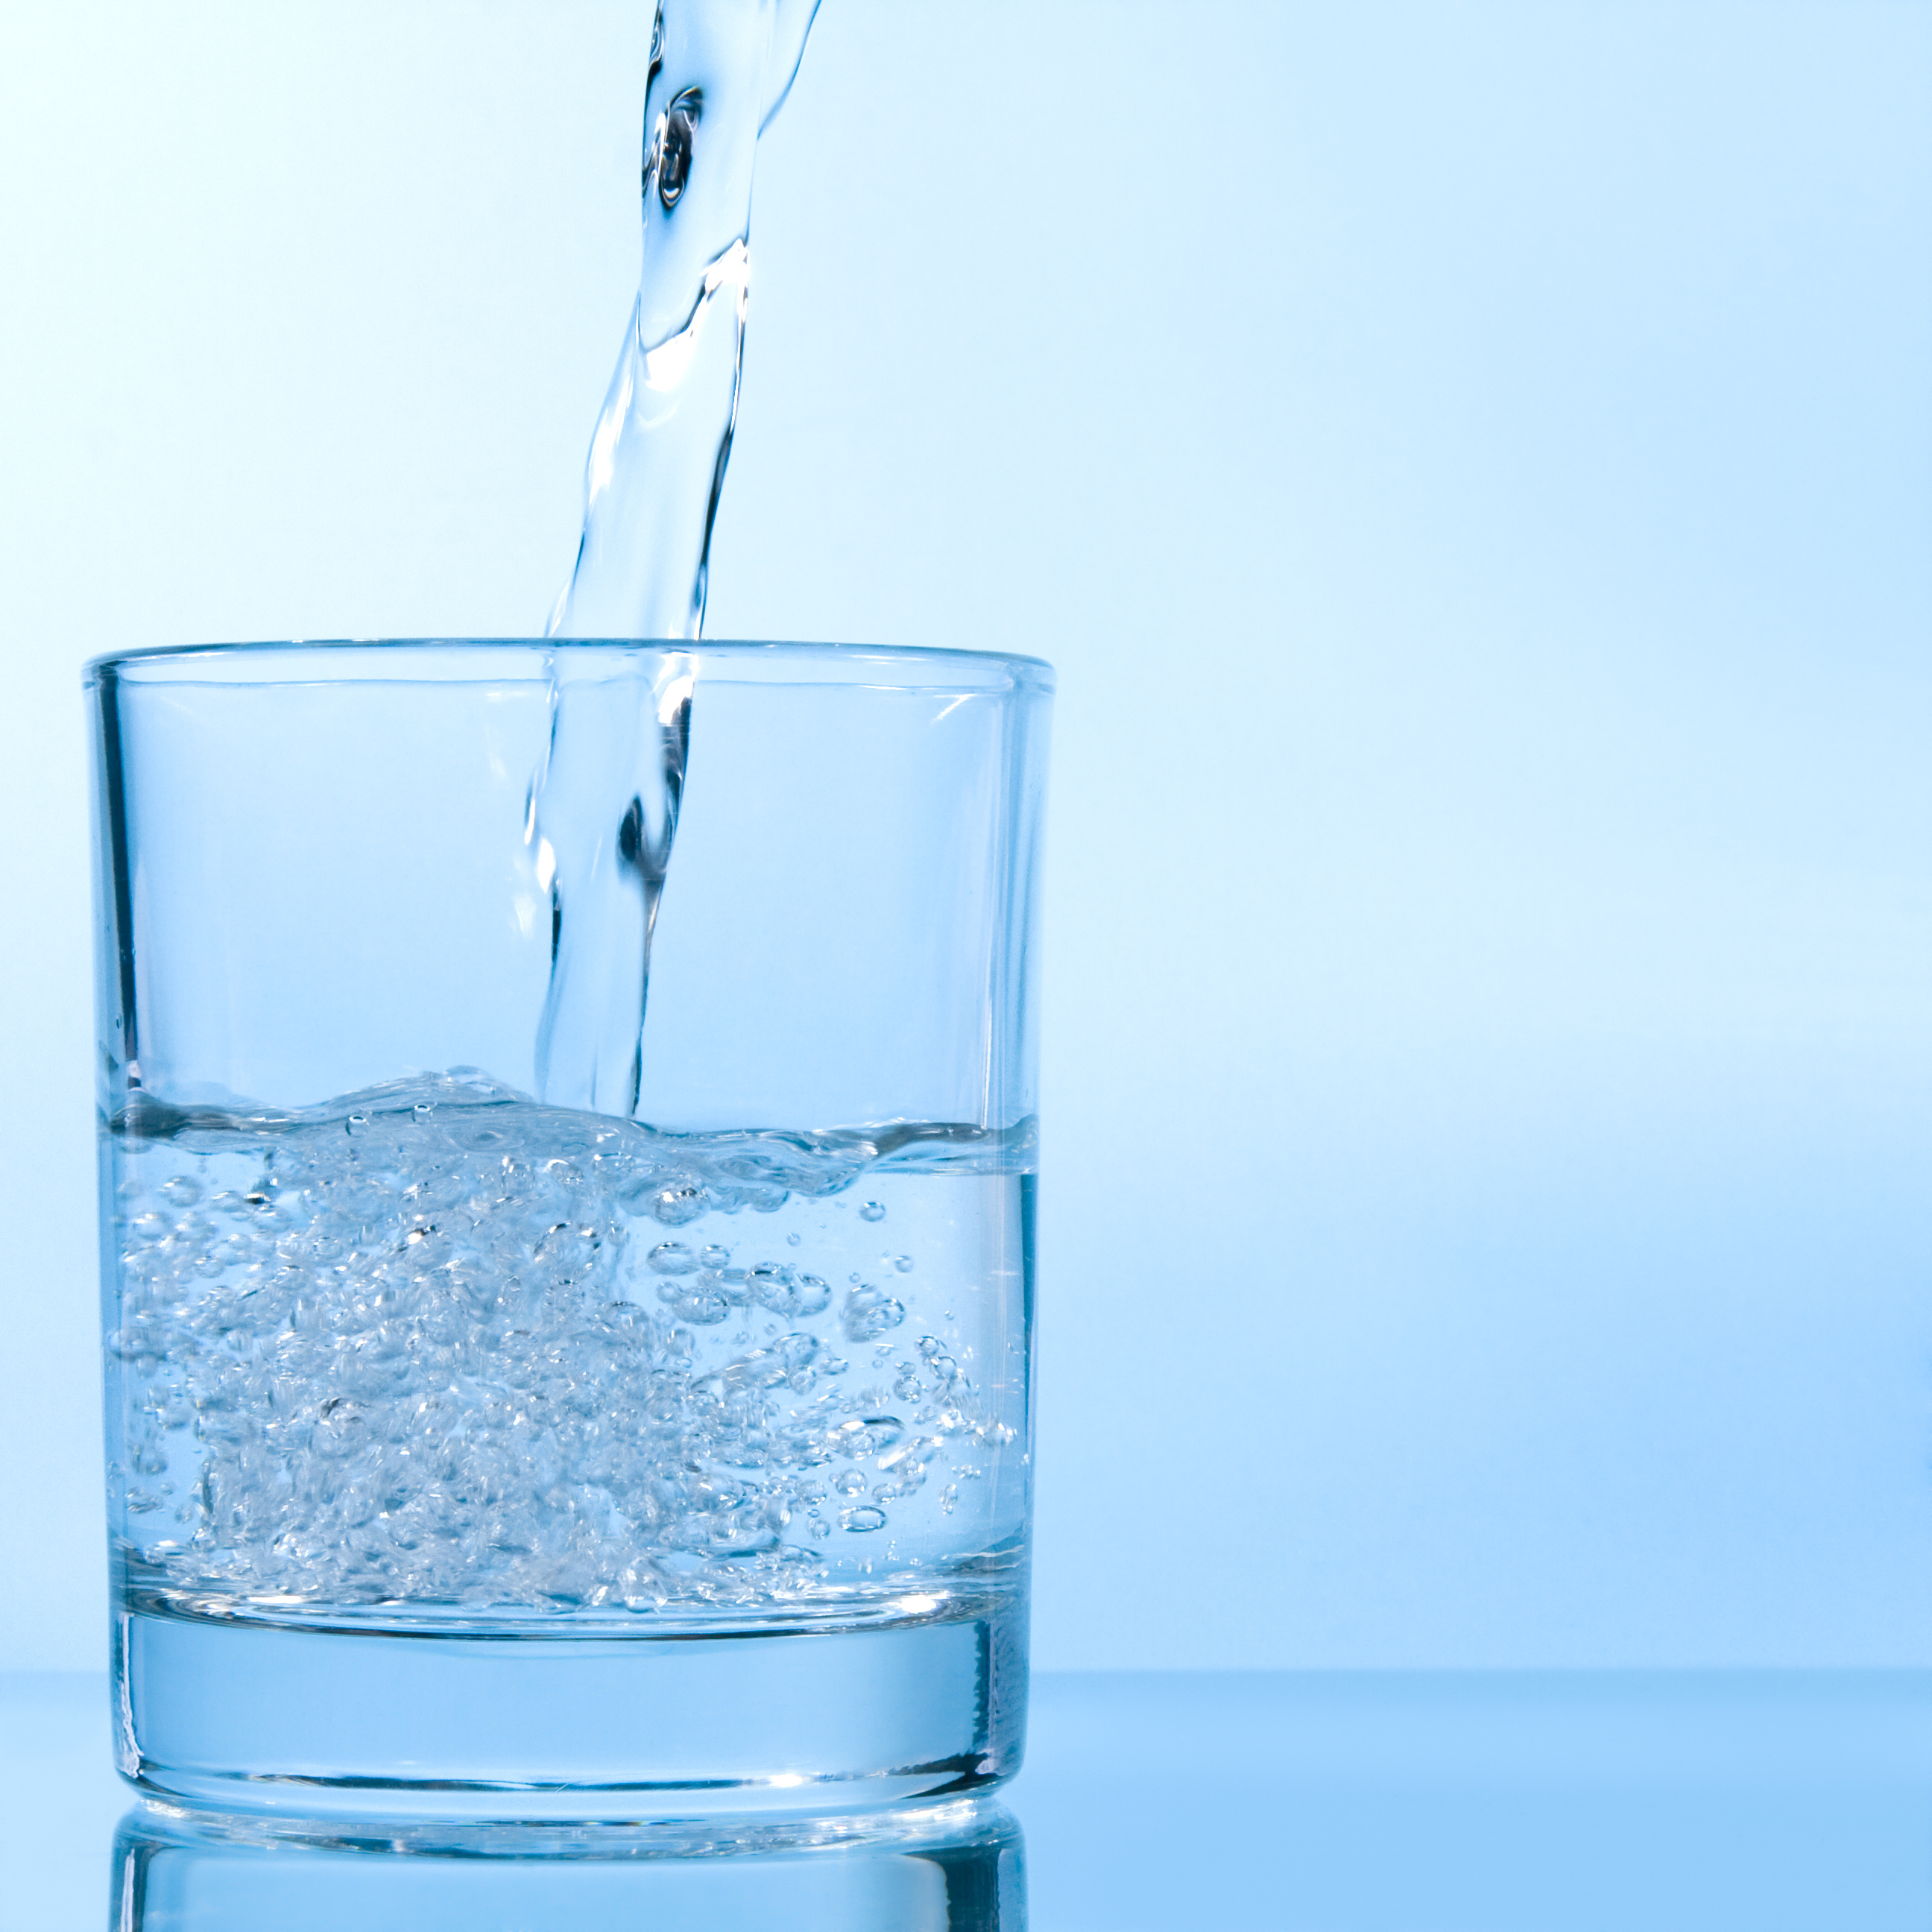 Fracking is no threat to drinking water if wells are sound